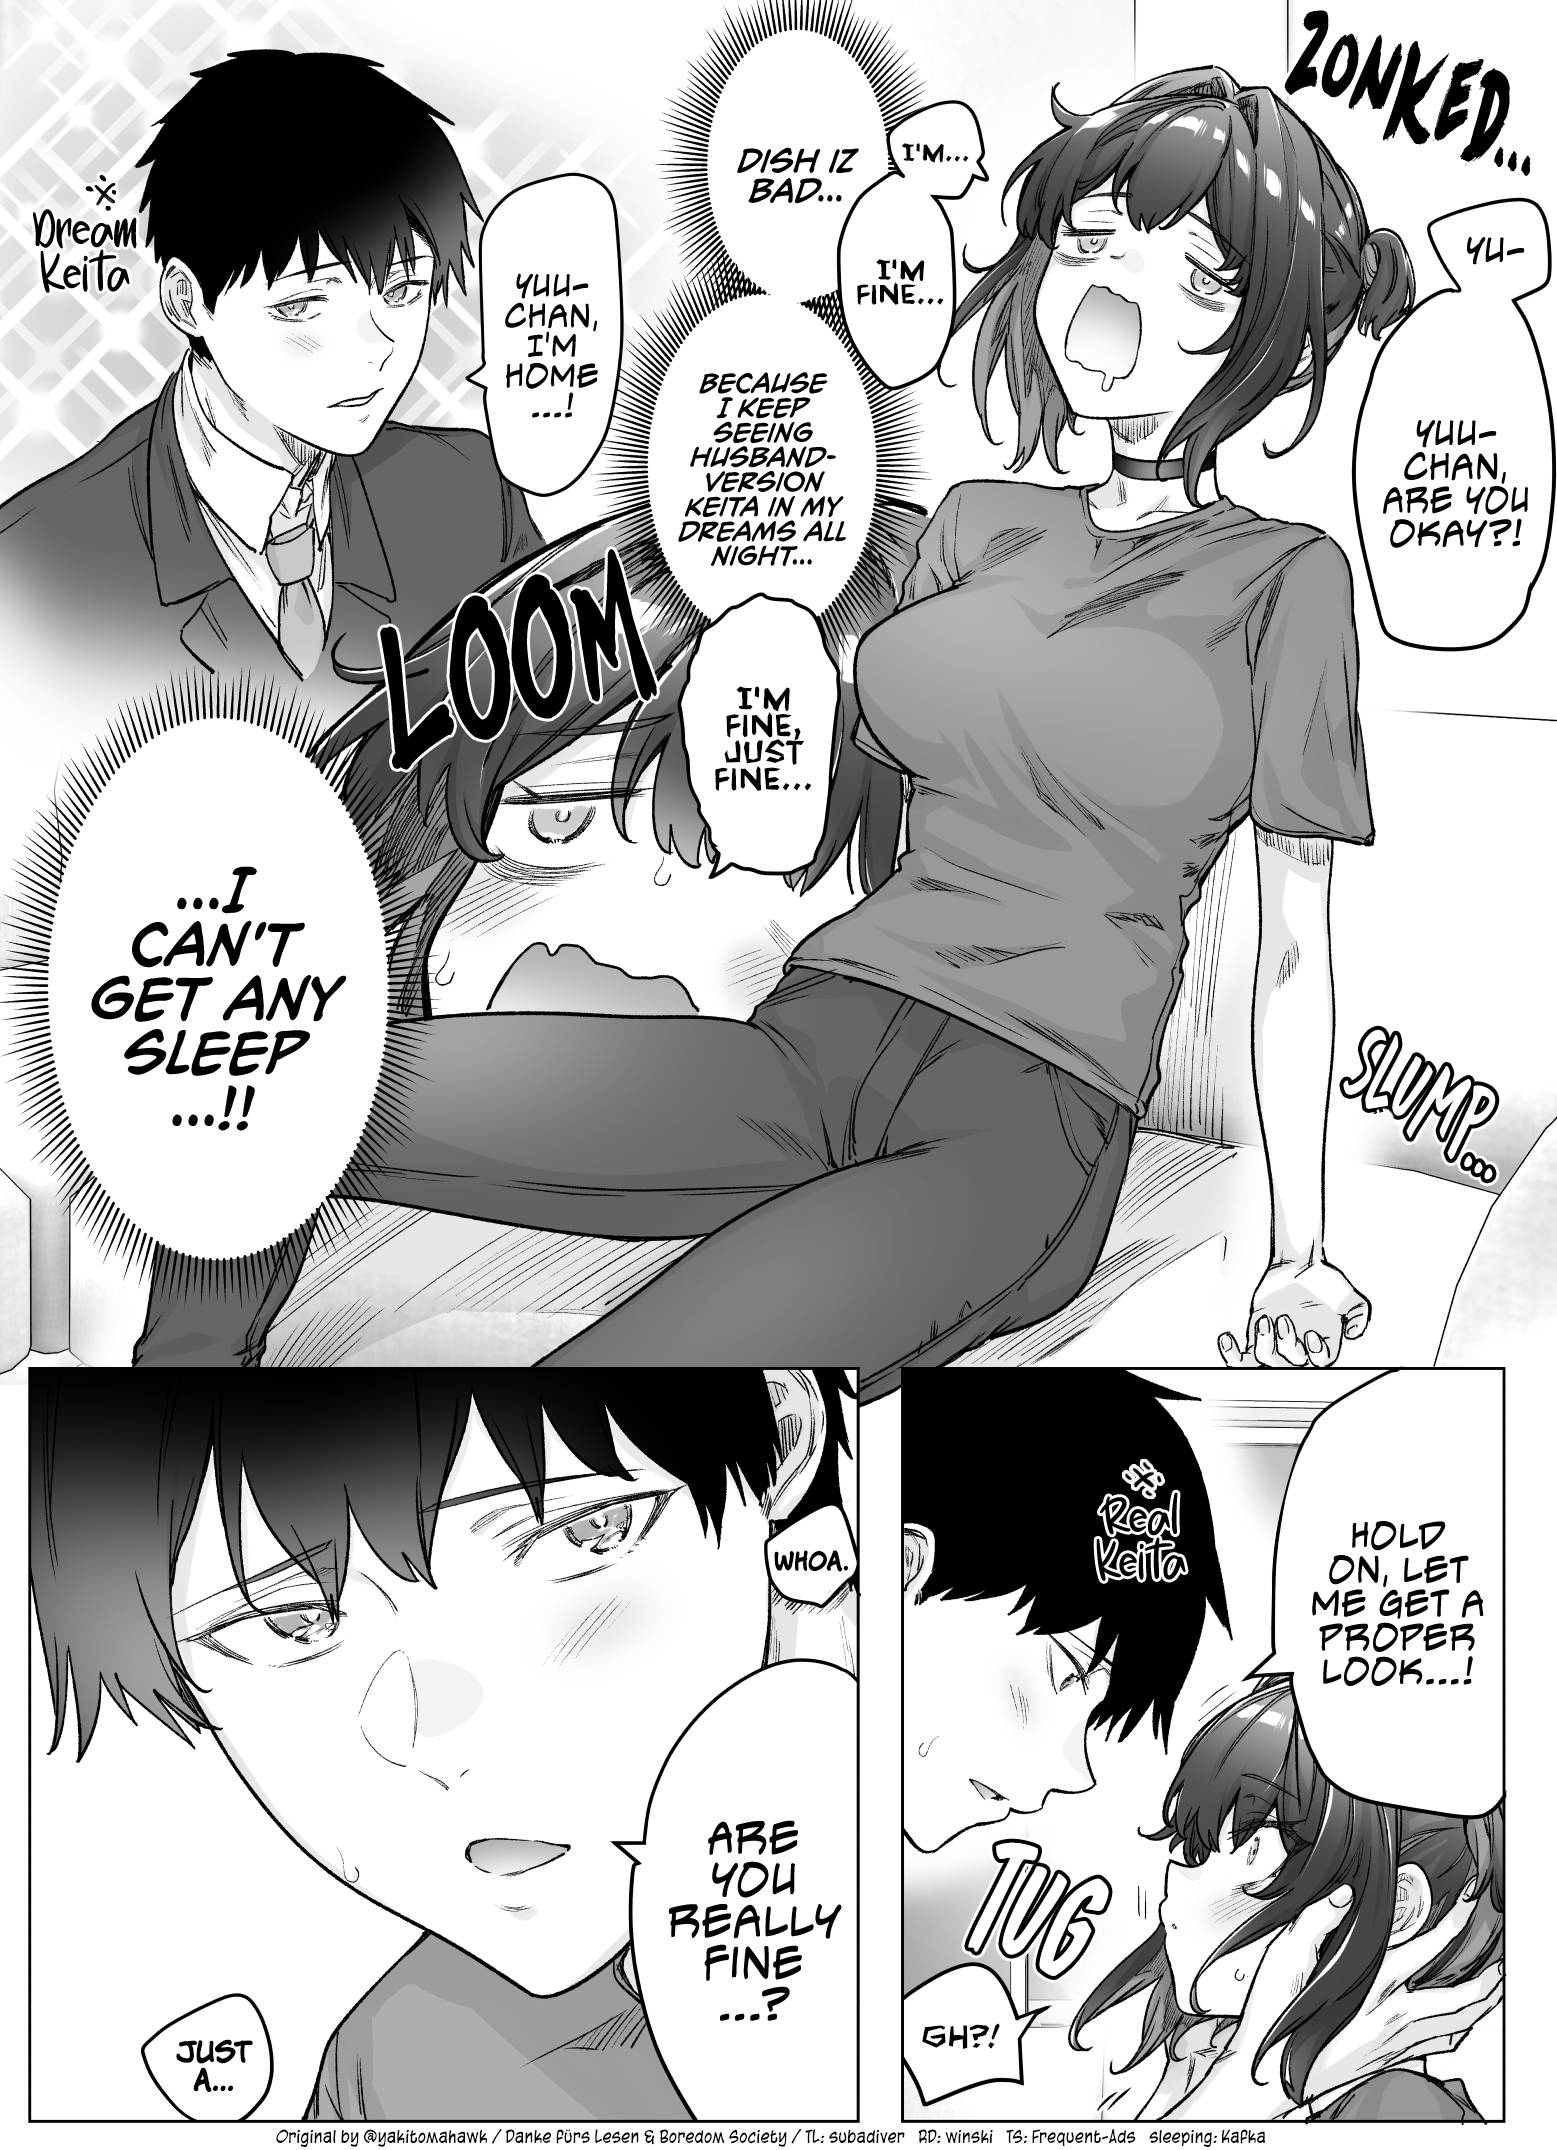 The Tsuntsuntsuntsuntsuntsuntsuntsuntsuntsuntsundere Girl Getting Less and Less Tsun Day by Day - chapter 94 - #1